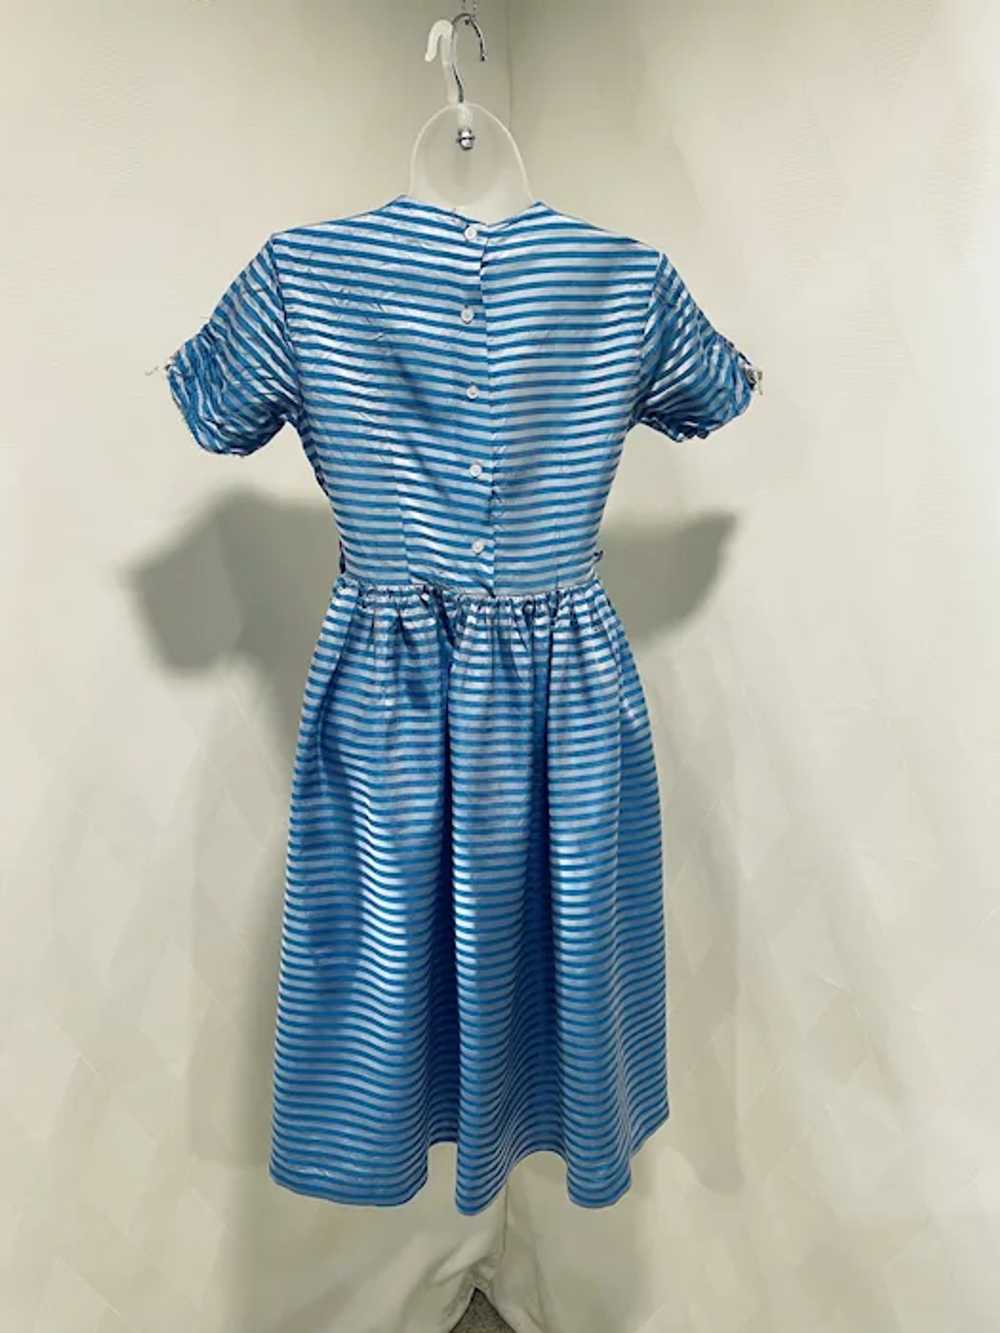 Vintage 1950s Blue and Silver Striped Dress - image 6